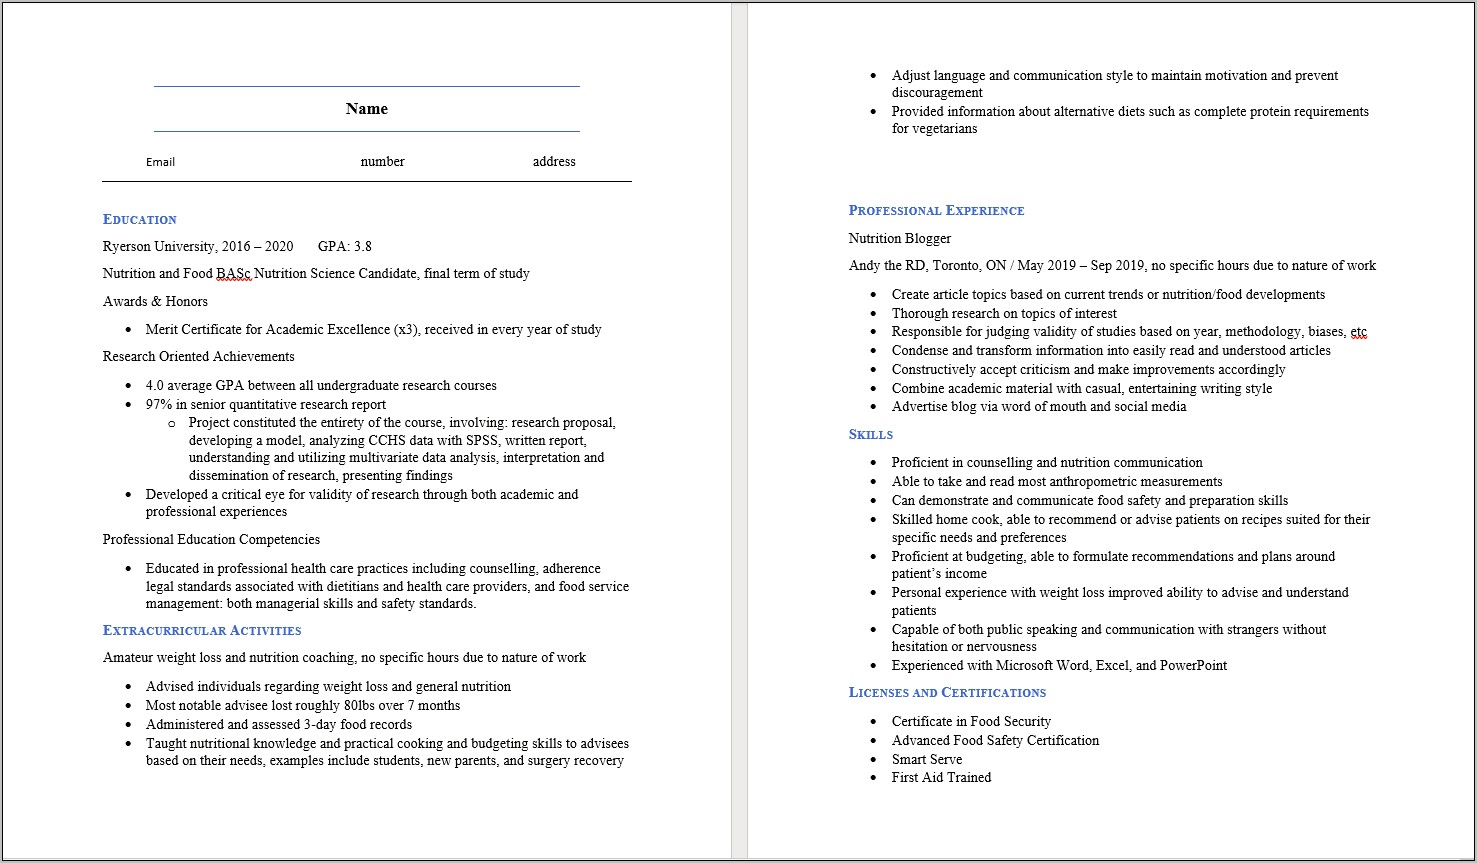 Putting Projects Before Work Experience In Resume